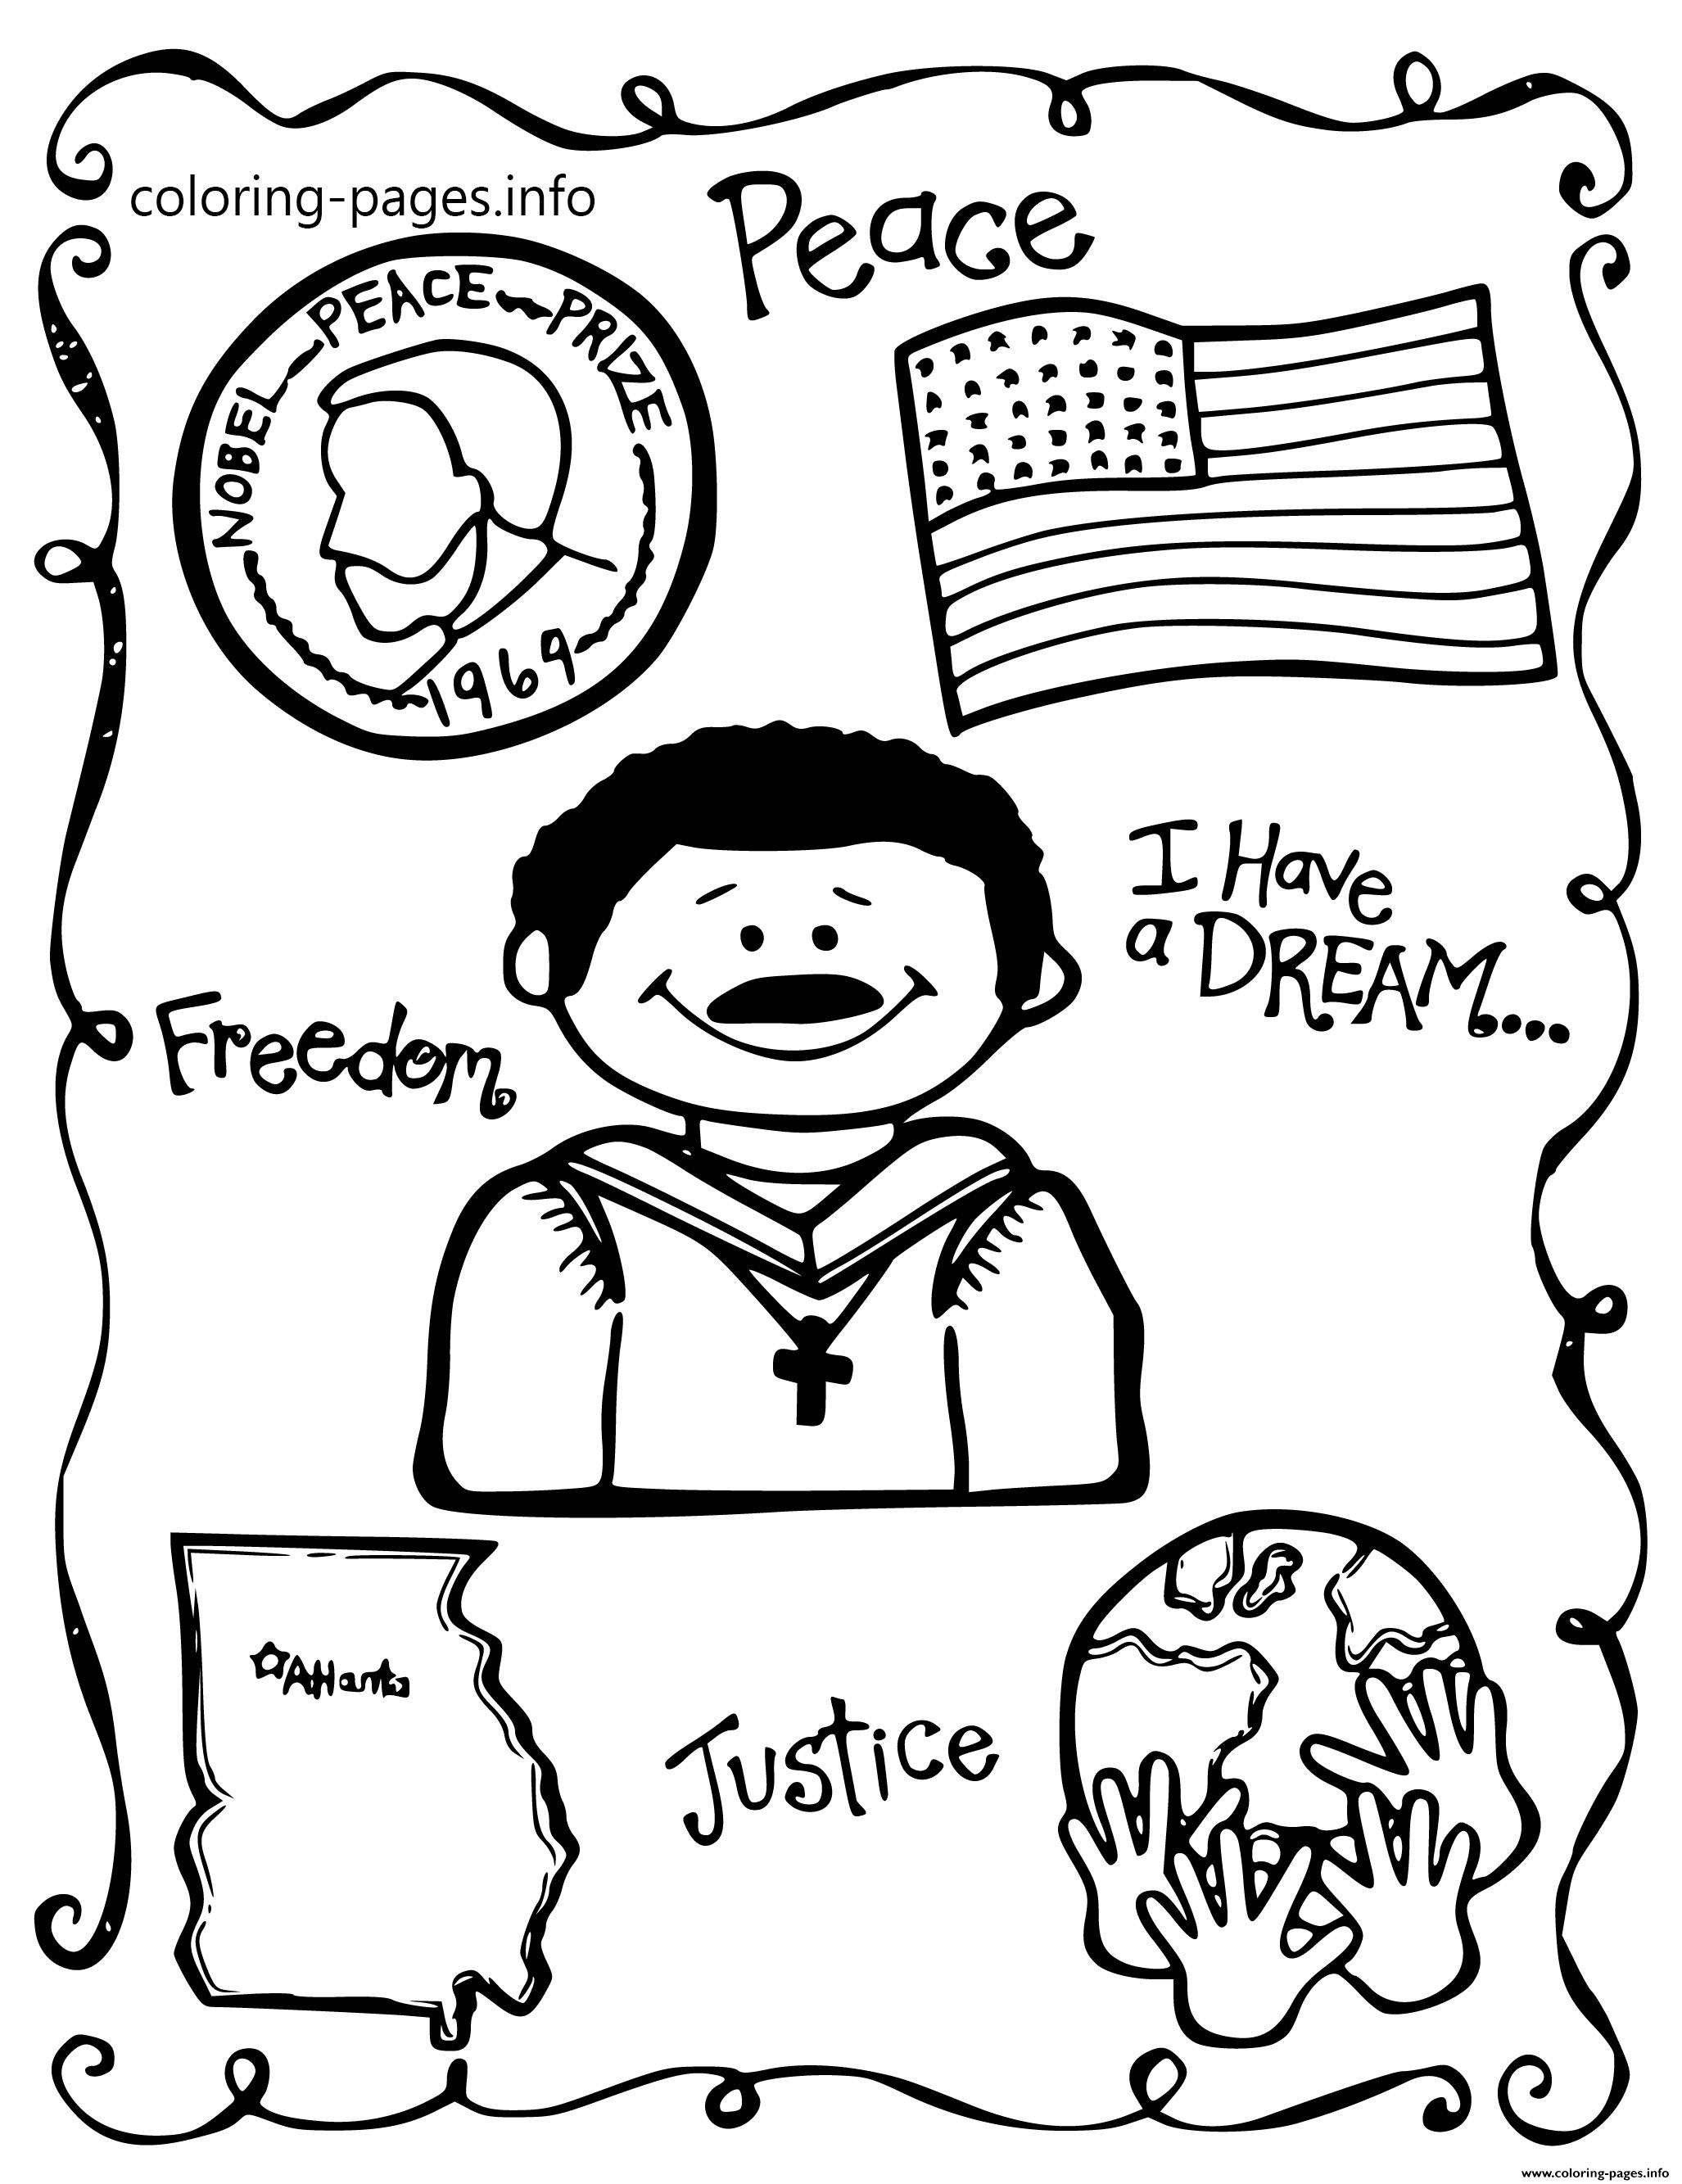 Mlk Day Coloring Pages